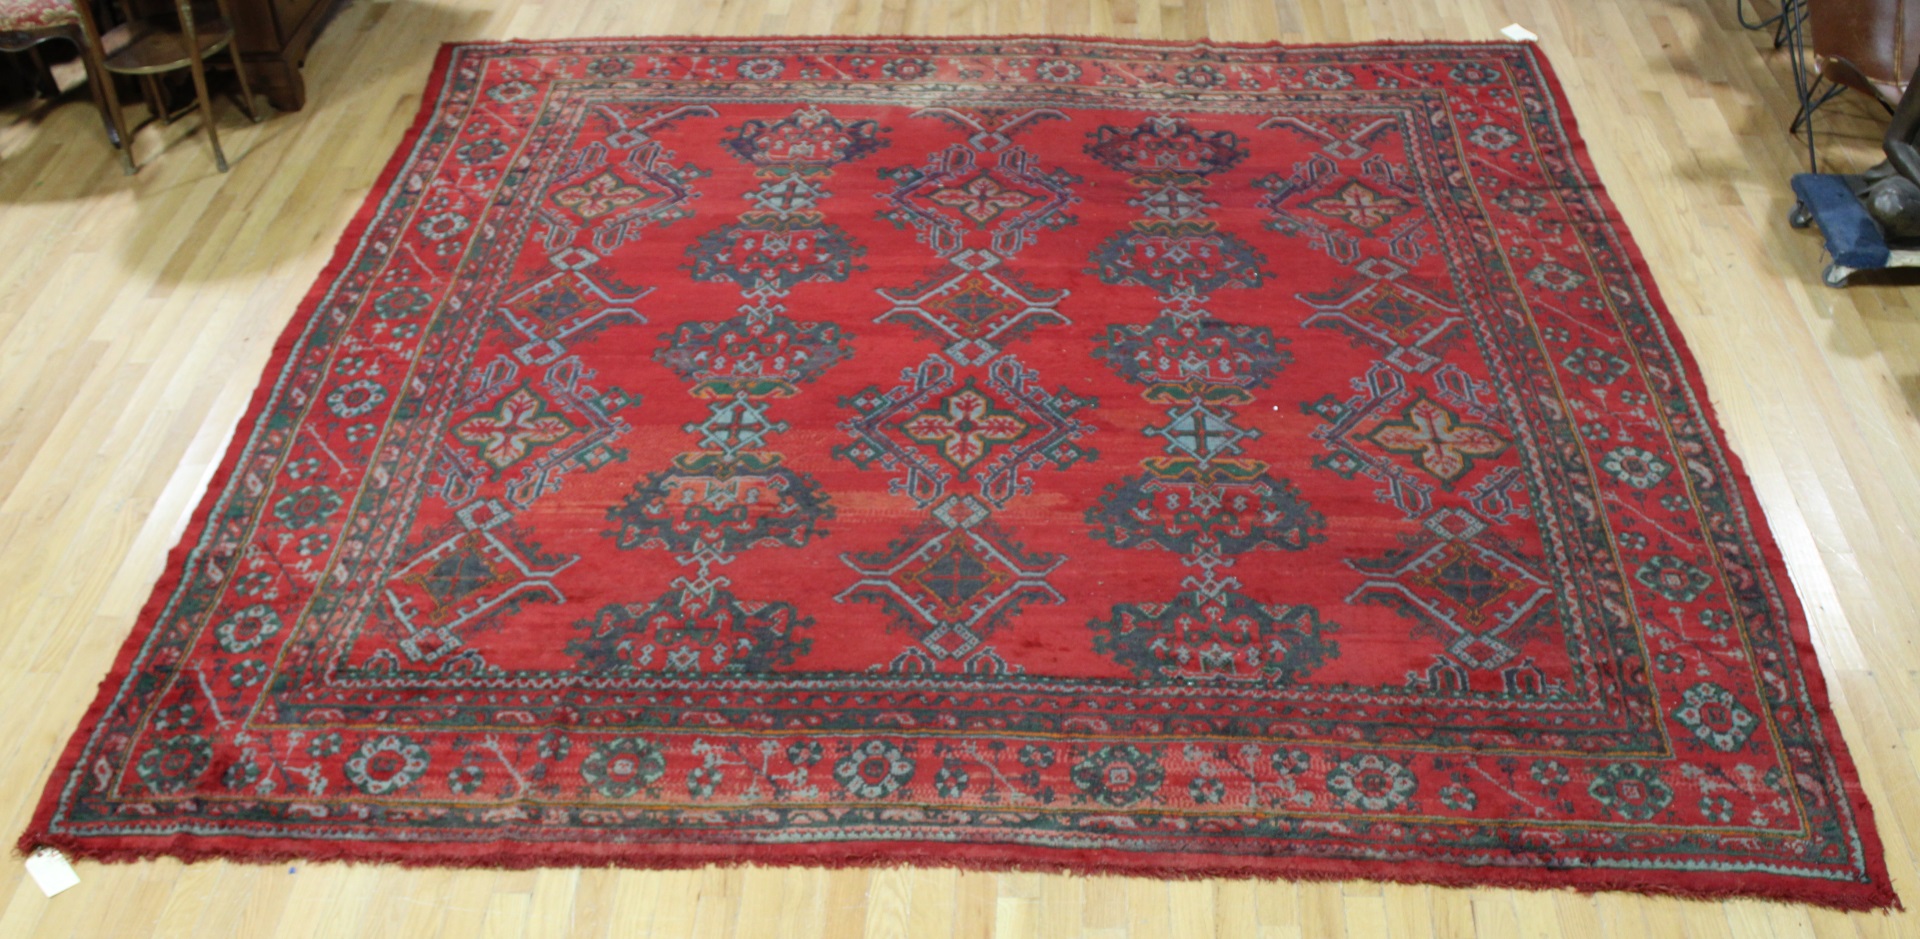 ANTIQUE AND FINELY HAND WOVEN ROOMSIZE